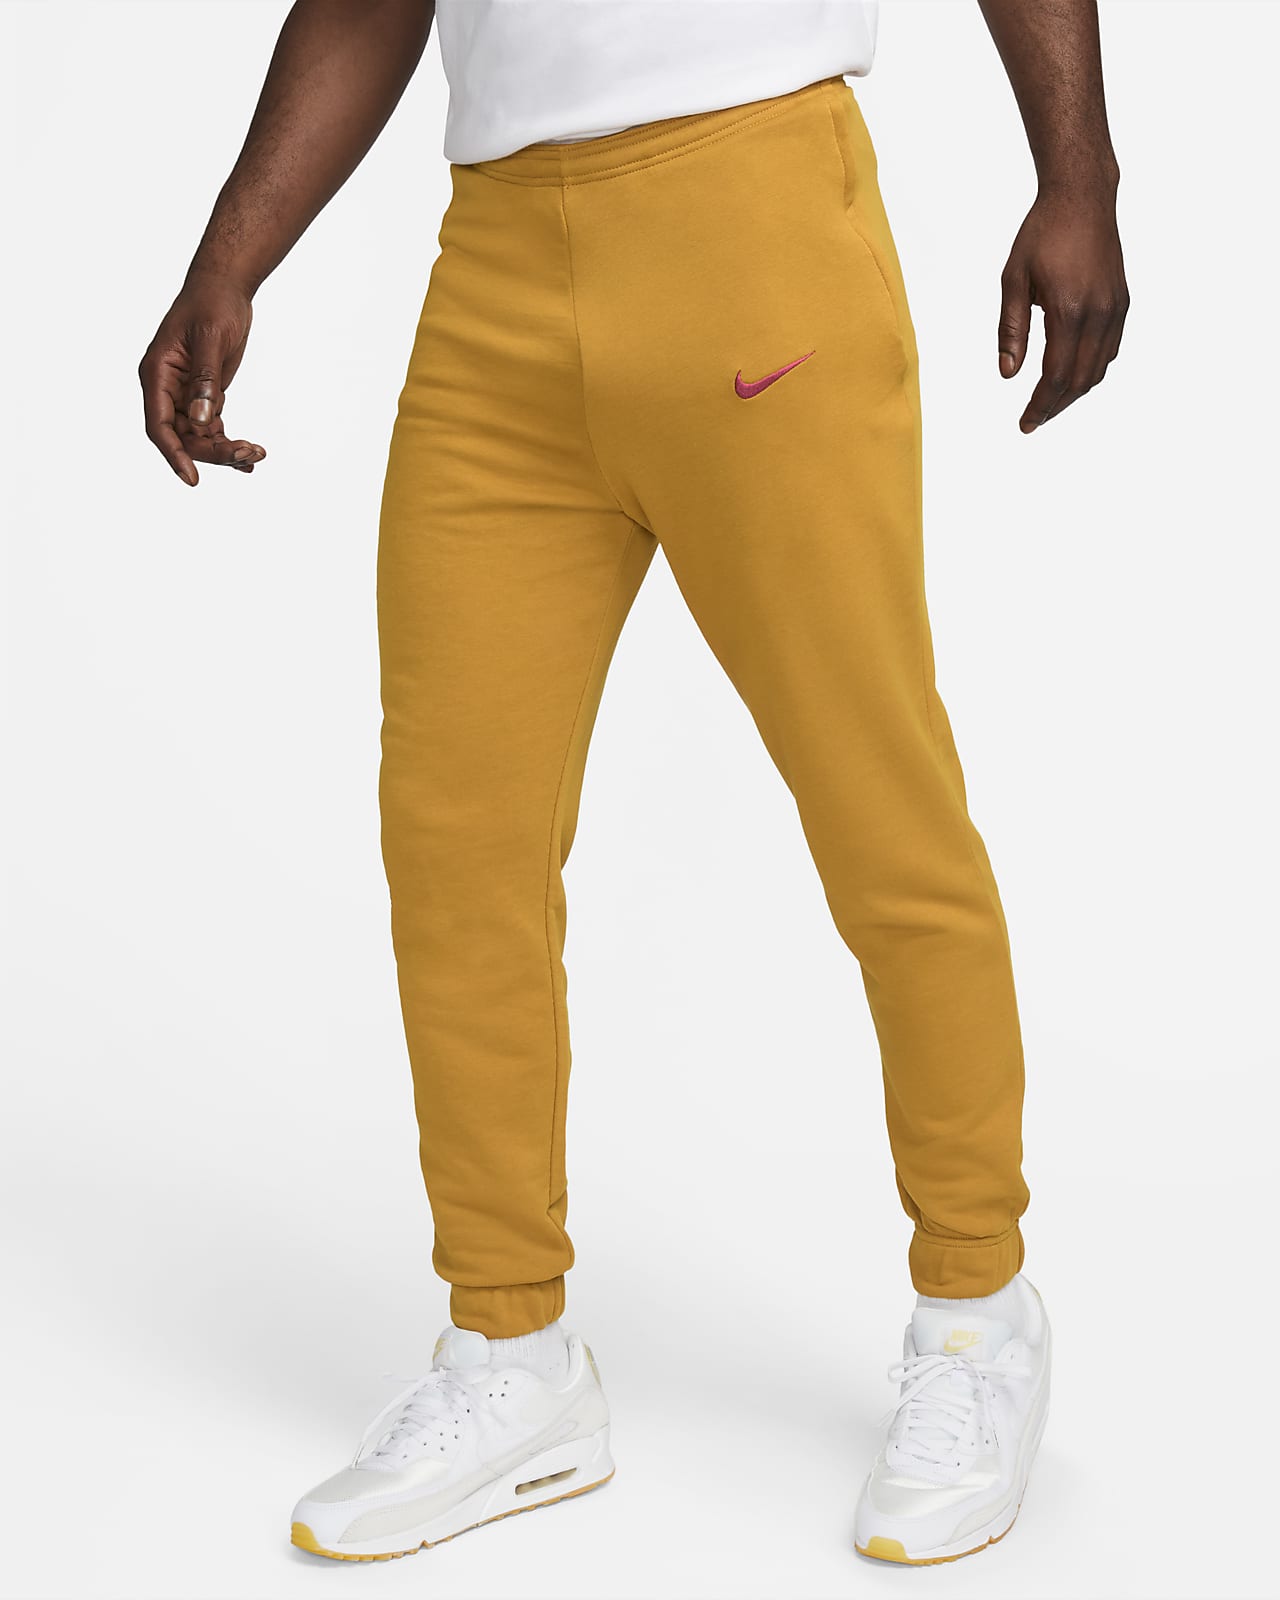 Nike Sportswear French Terry Pants Review 